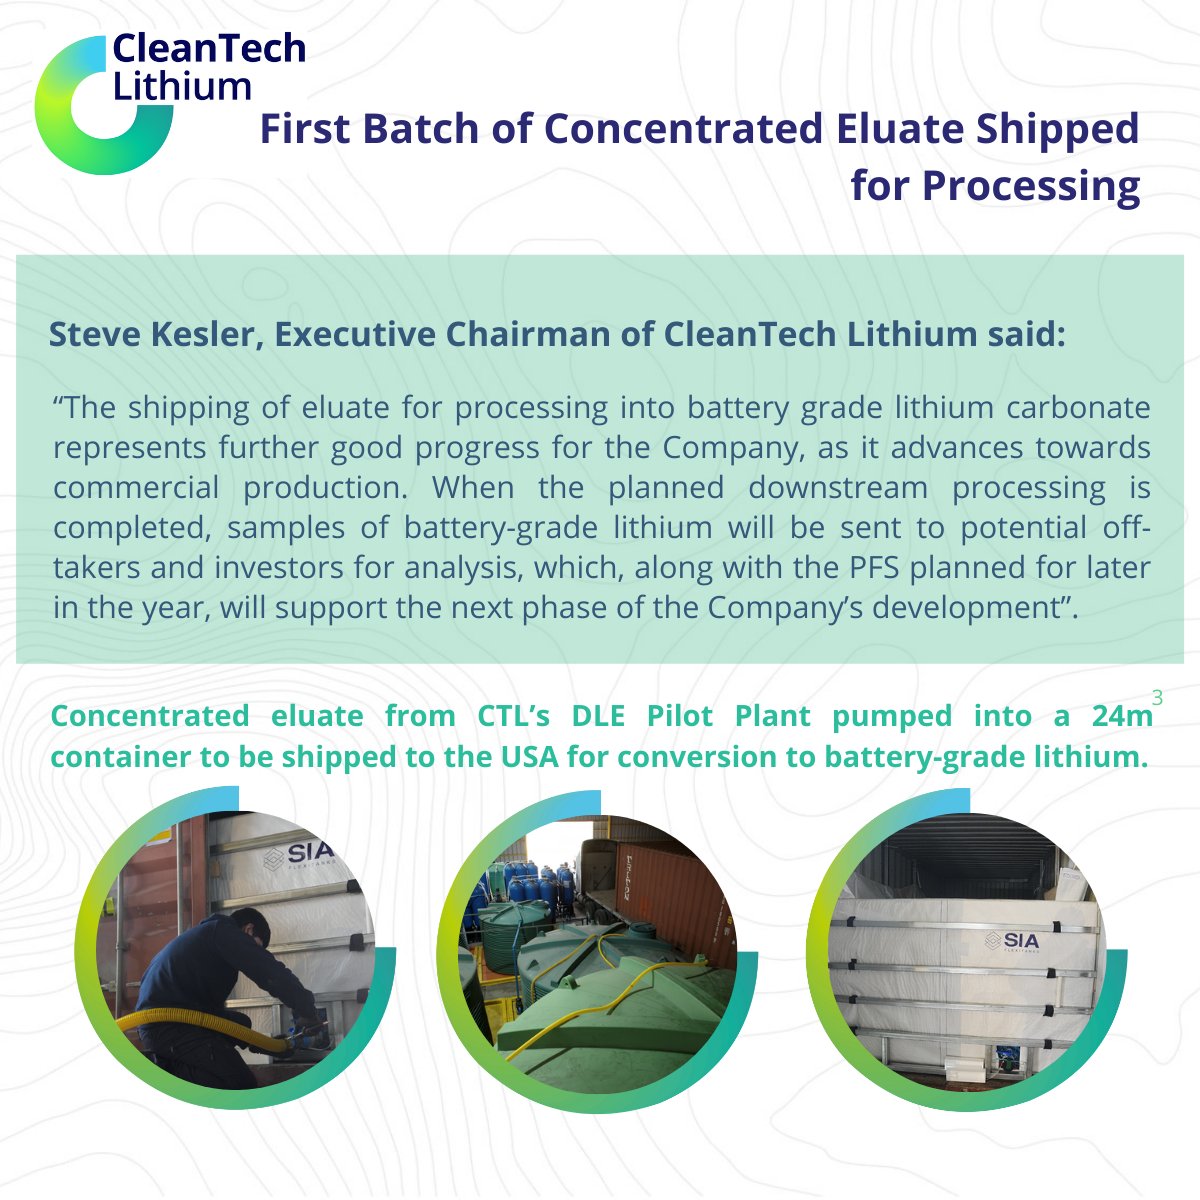 #CTL is pleased to announce that the initial batch of 24m3 of high quality concentrated eluate has now left the its #DLE pilot plant in #Chile and is in transit to a third-party processor, Conductive Energy, in the USA for conversion to battery-grade #lithium carbonate.

$CTLHF